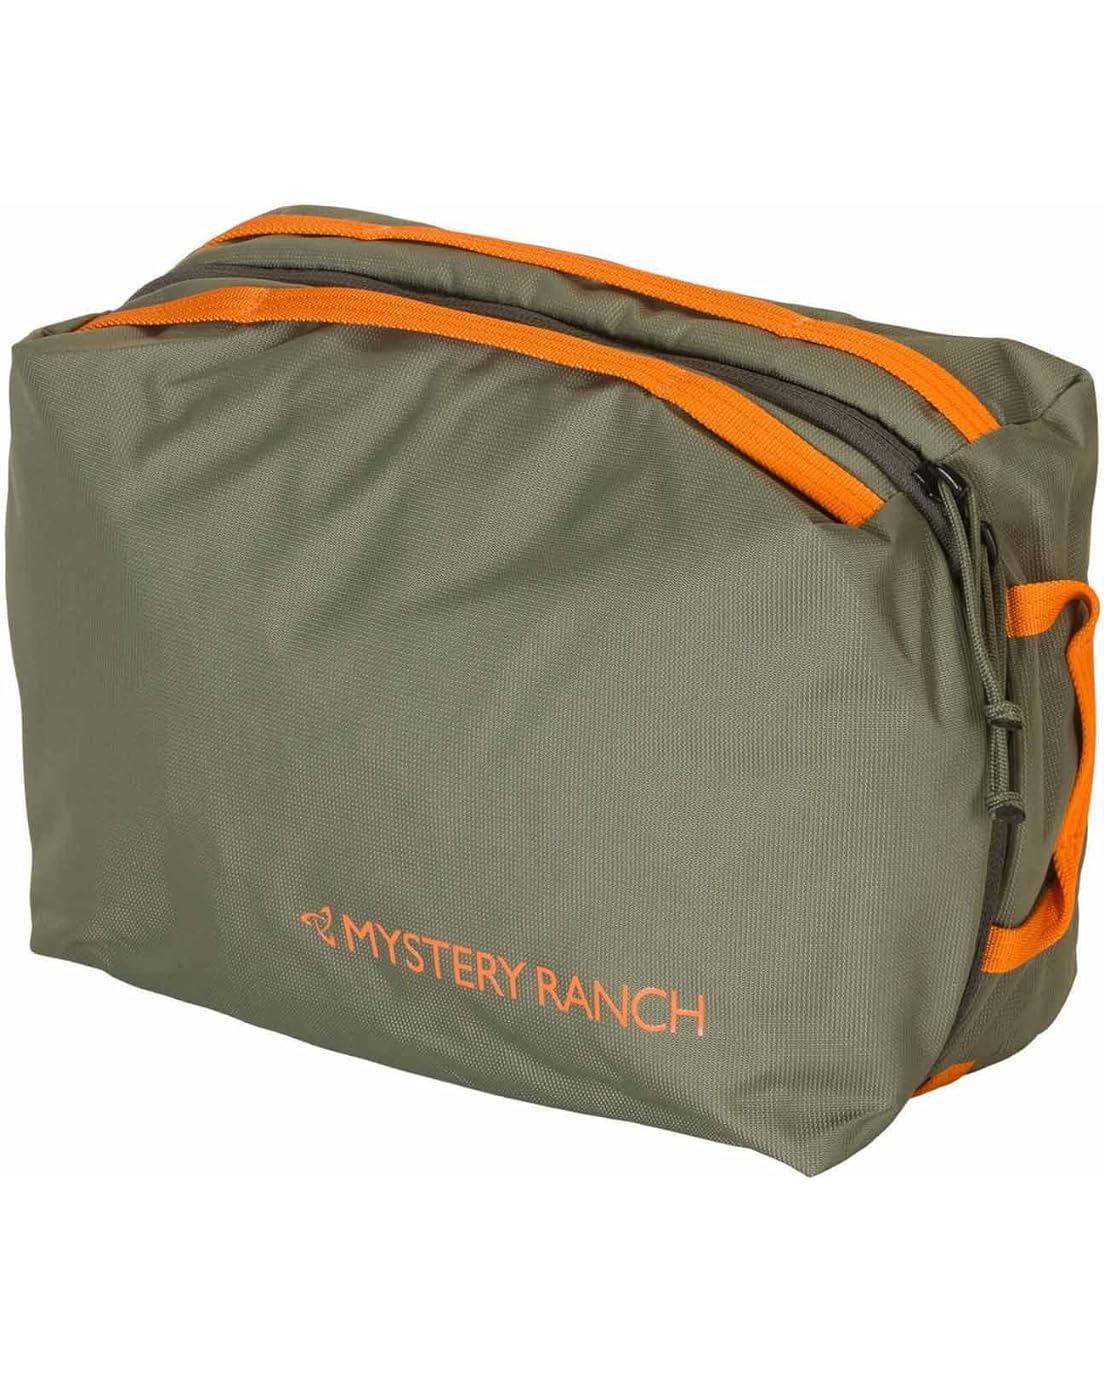  Mystery Ranch Spiff Kit Large